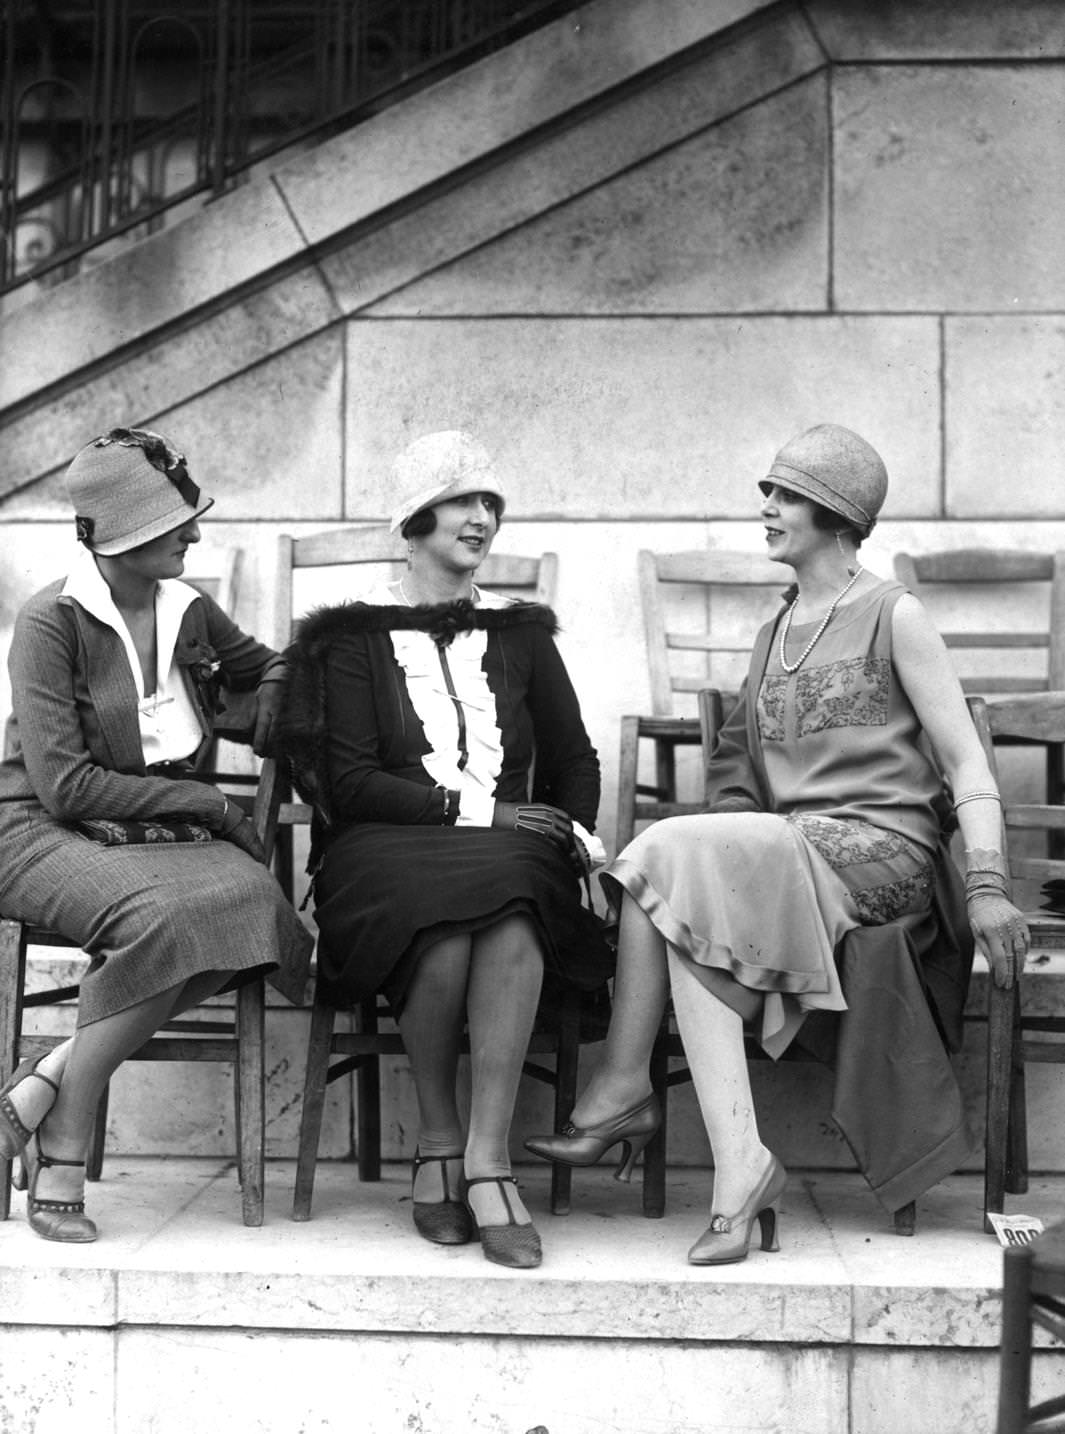 Three day time outfits worn with cloche-hats, shoes are high-heeled one-bar, t-bar and high vamp court, 1925